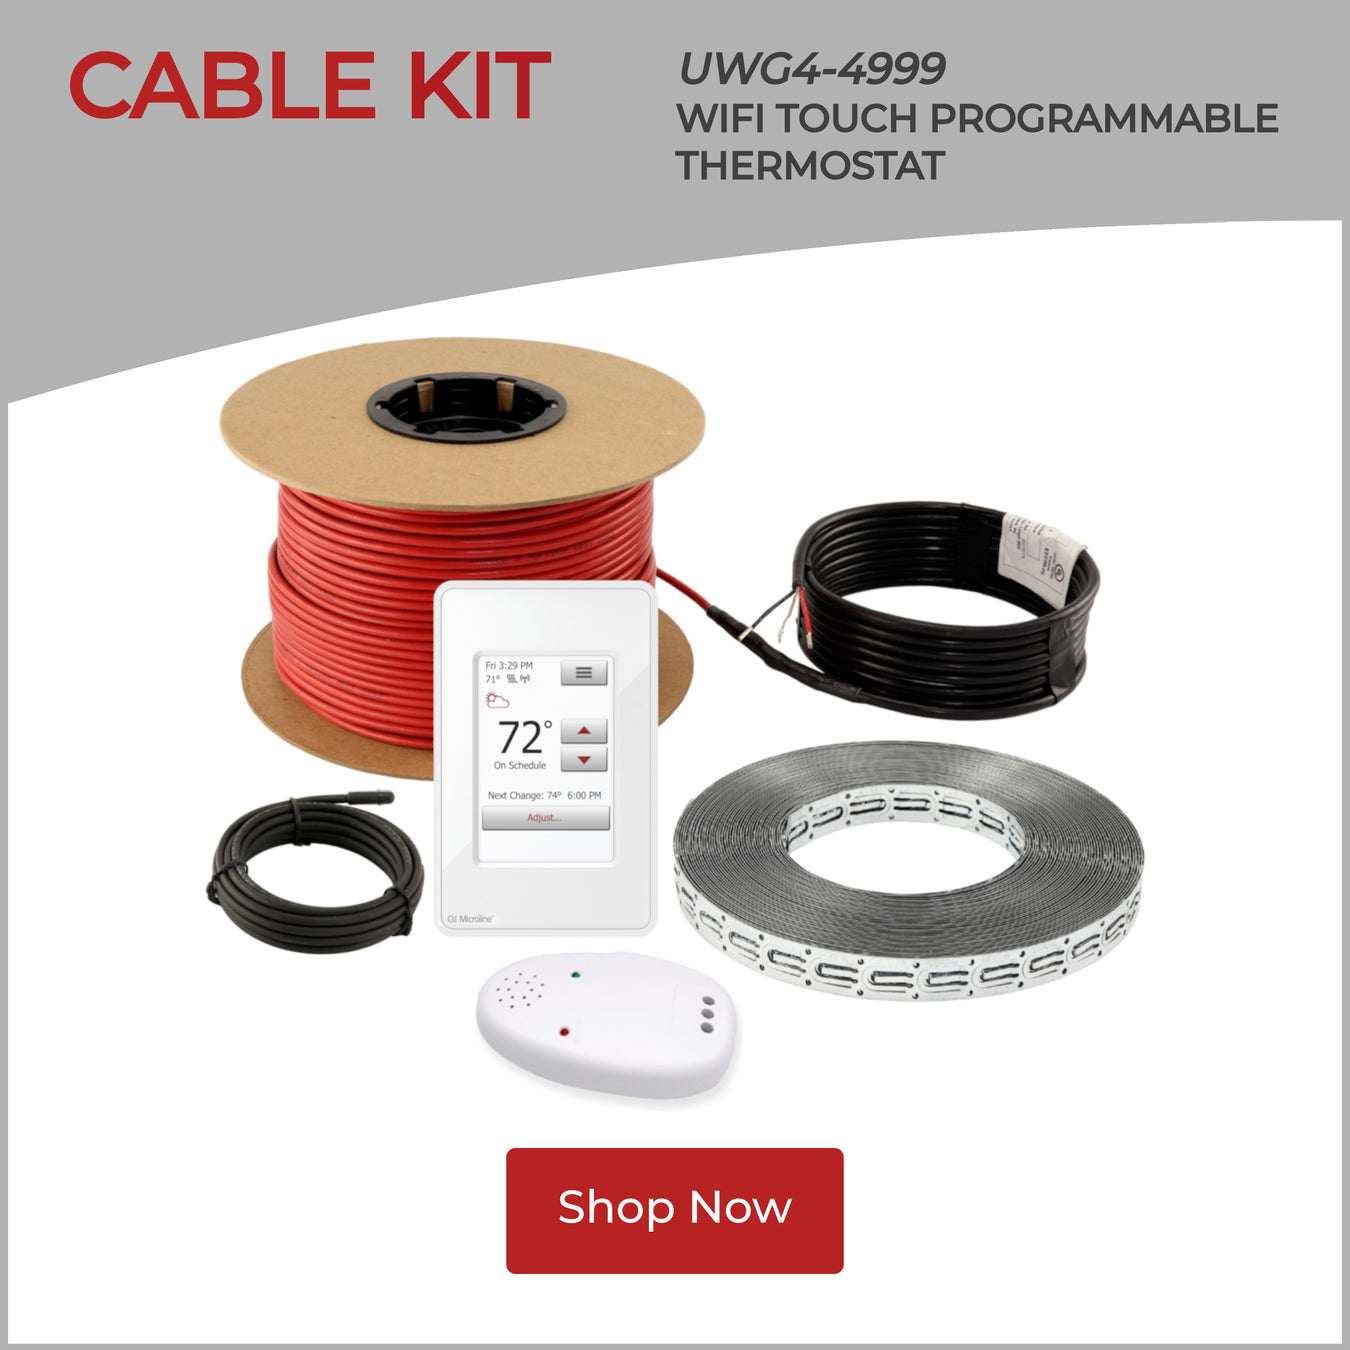 Overview_-_Cable_Kit_with_UWG4_Strapping